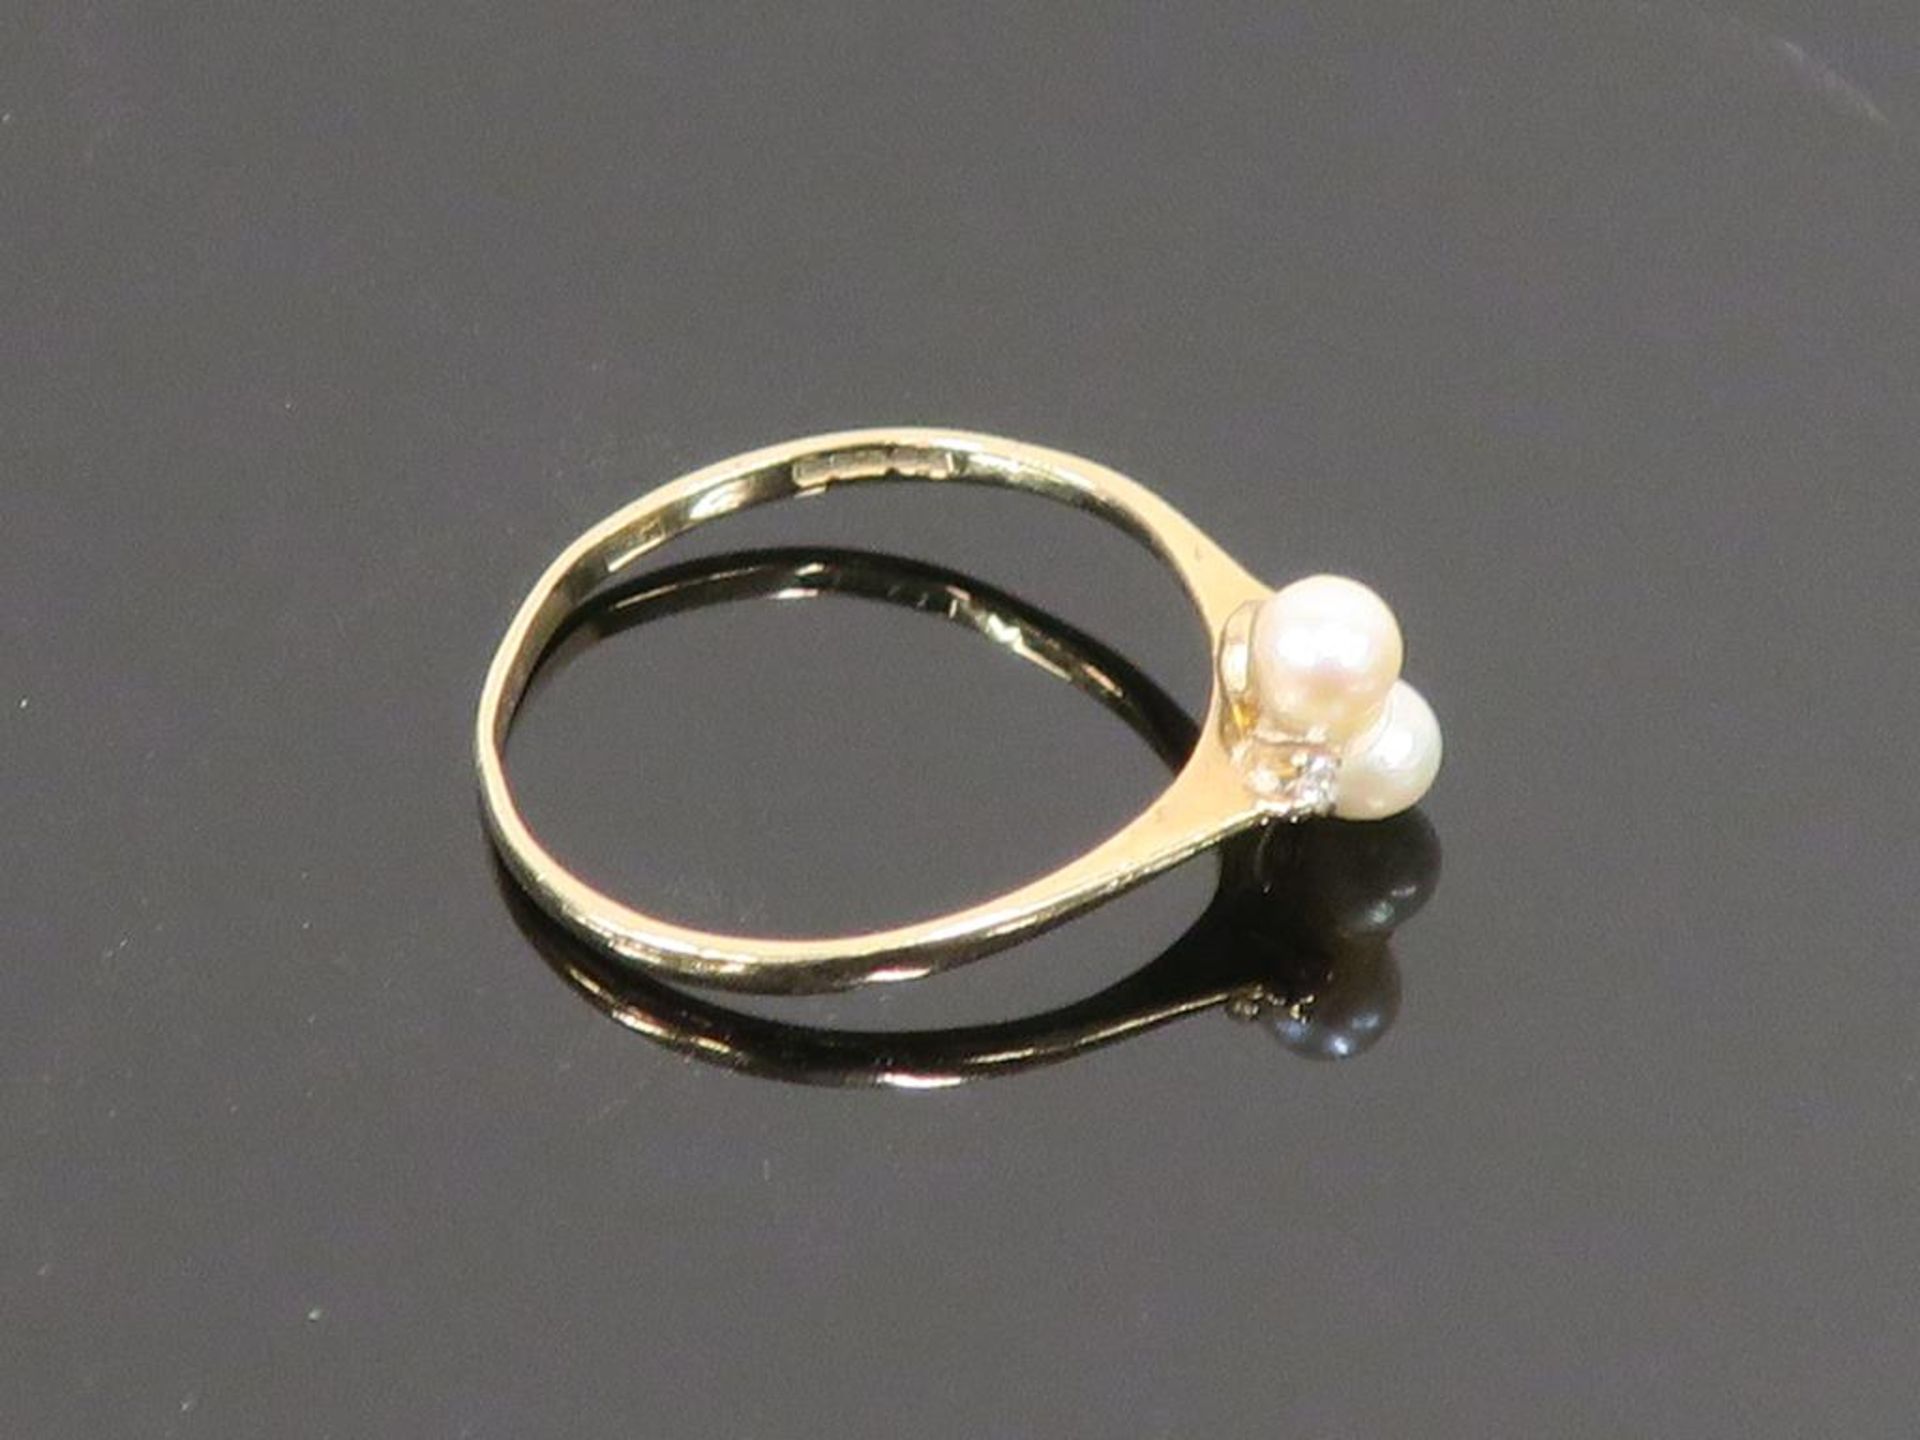 A 9ct Gold Diamond and Pearl Ring (size N 1/2) (est £40-£80) - Image 2 of 3